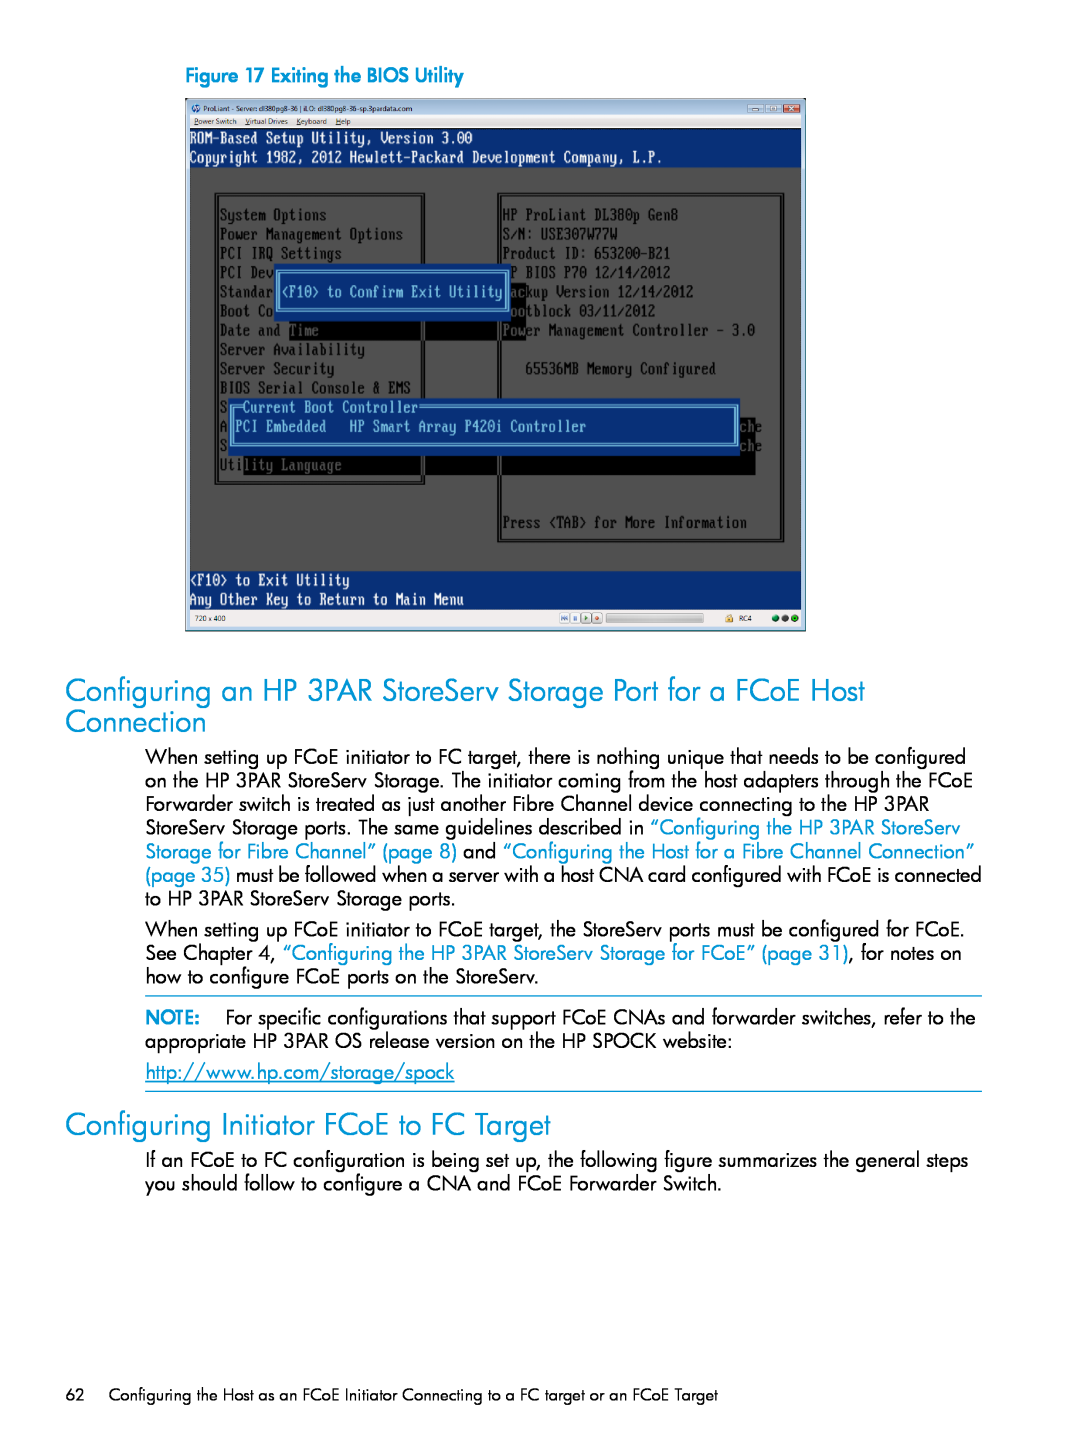 HP QR516B manual Configuring Initiator FCoE to FC Target, Exiting the BIOS Utility 